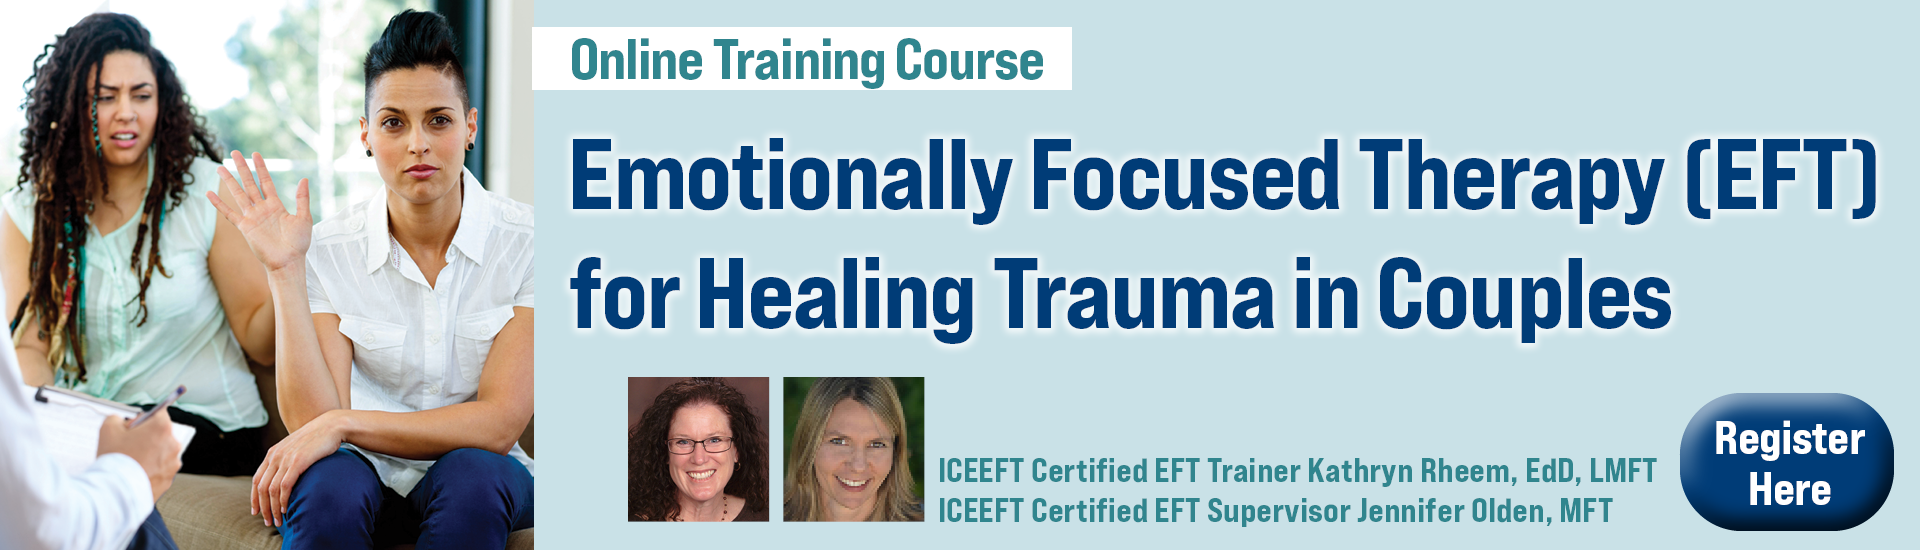 Emotionally Focused Therapy (EFT) for Healing Trauma in Couples